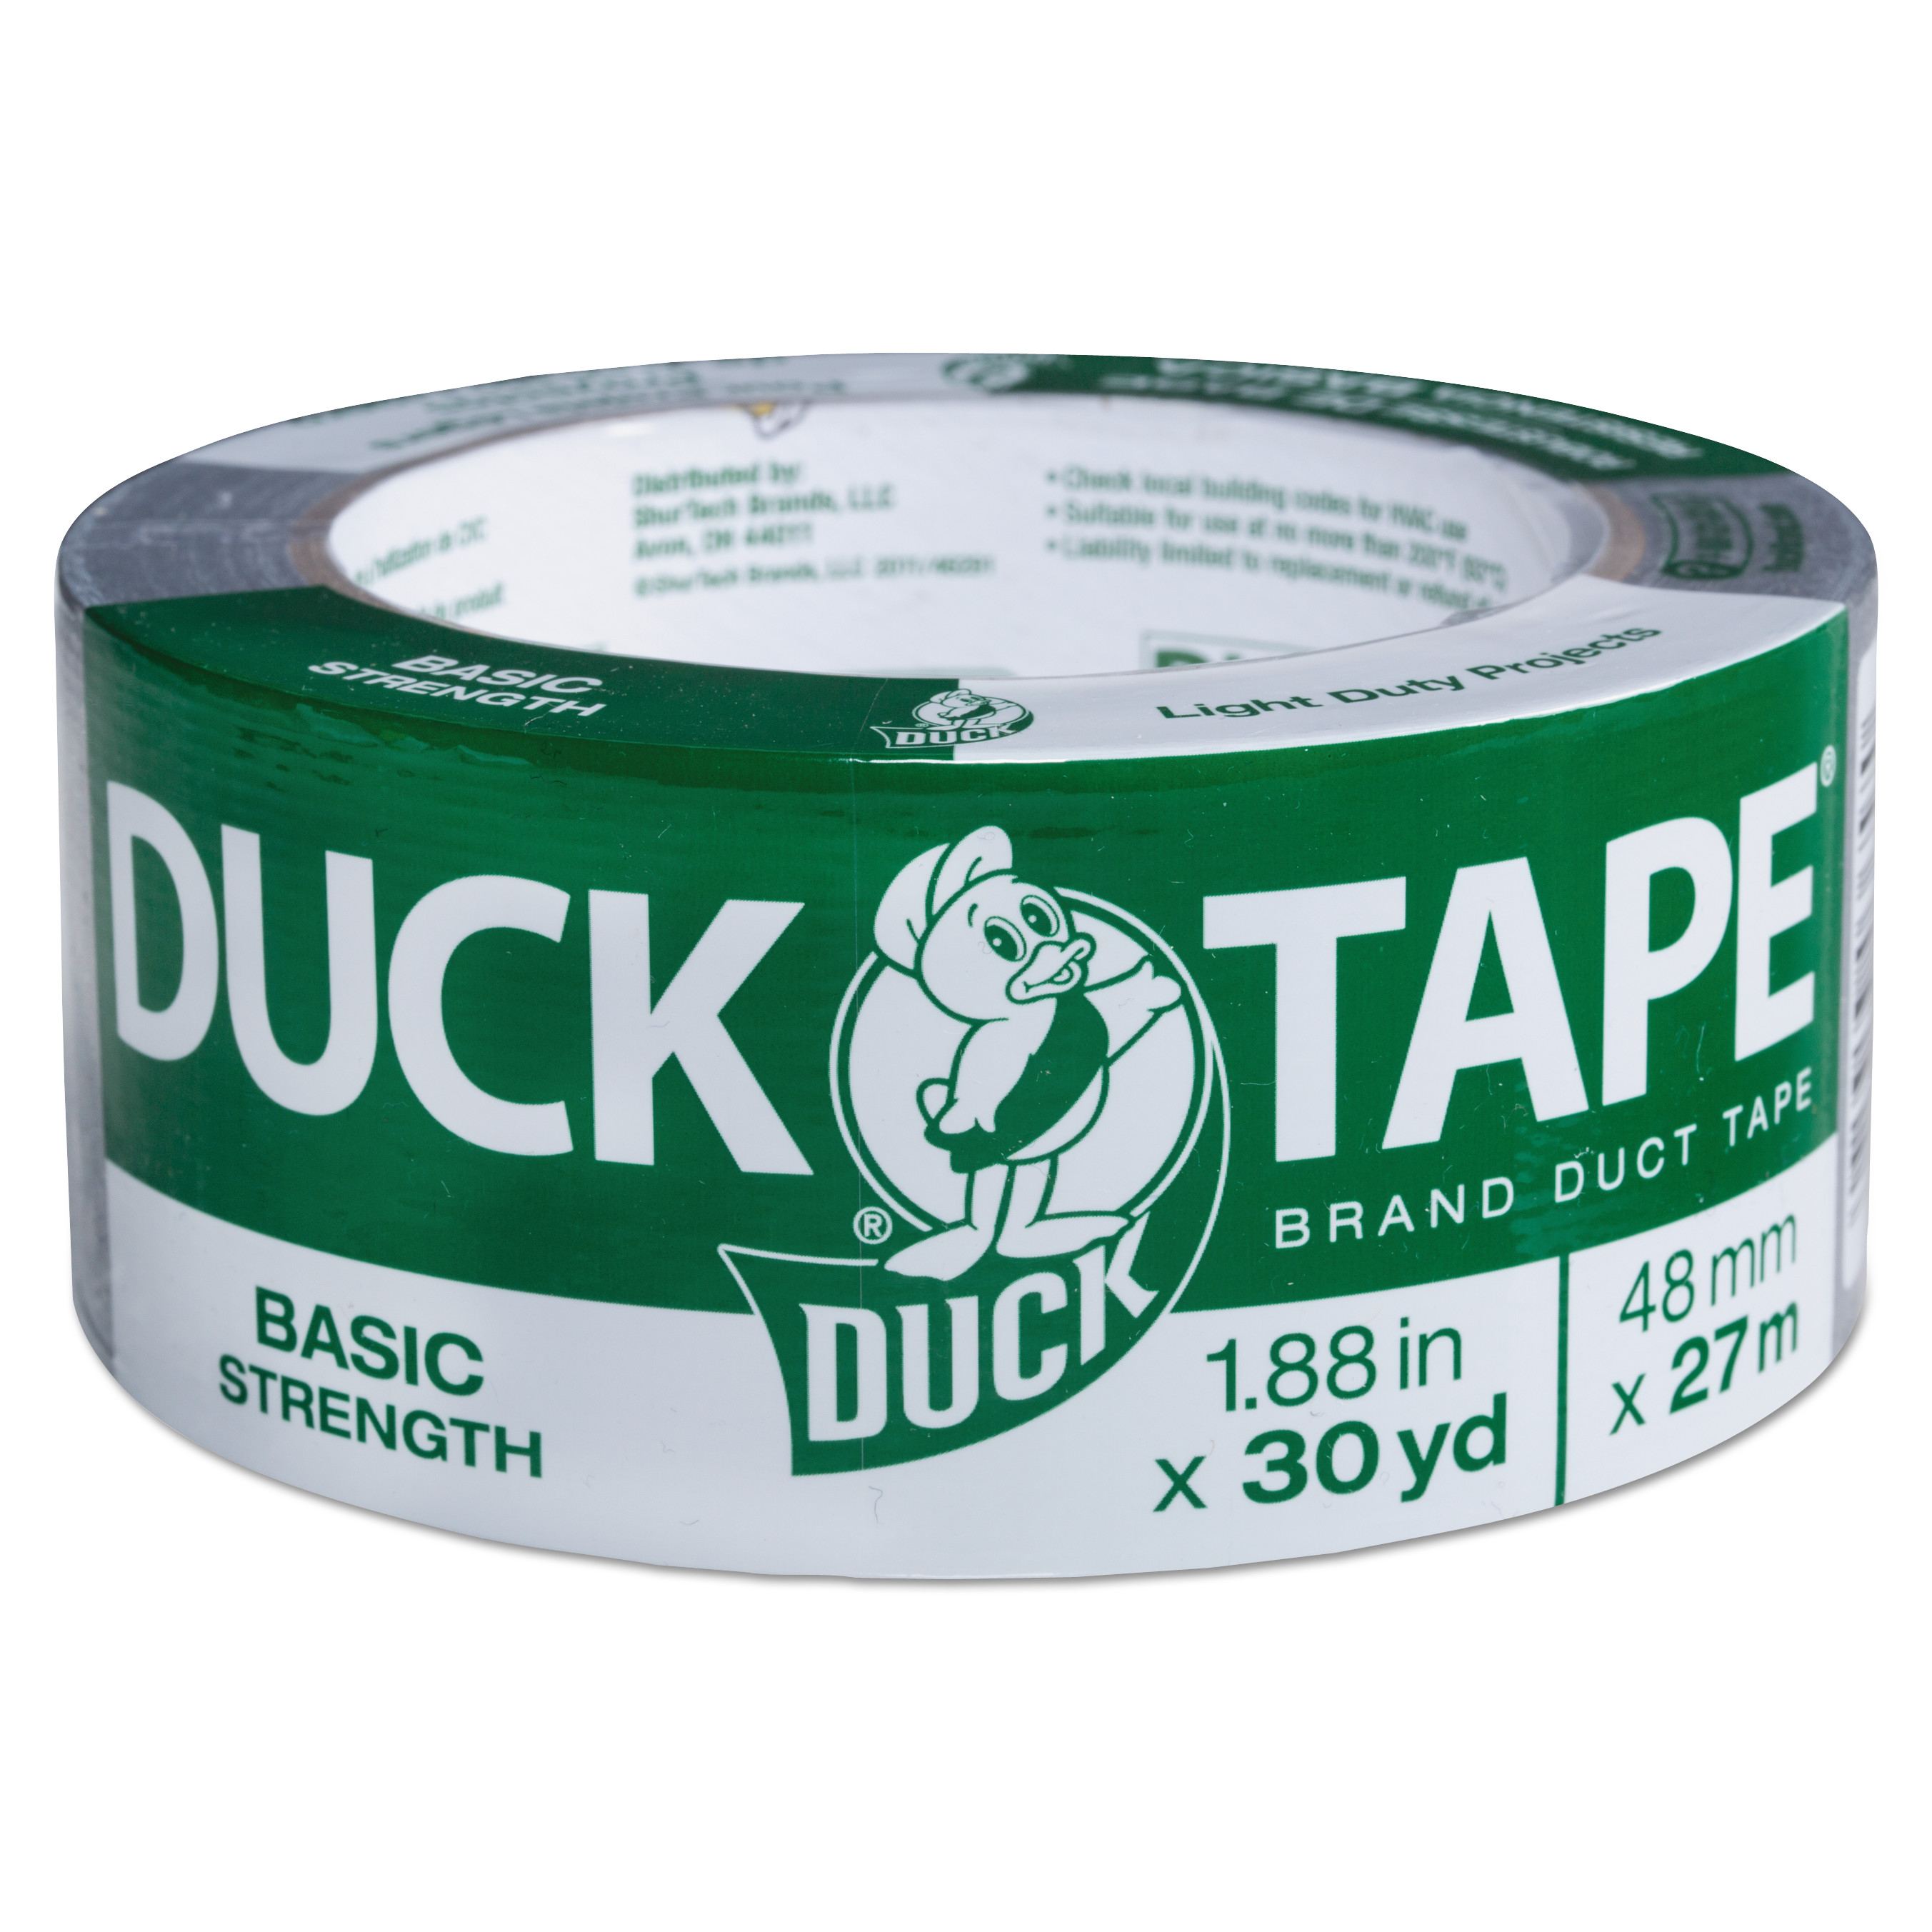  Duck 1154019 Basic Strength Duct Tape, 3 Core, 1.88 x 30 yds, Silver (DUC1154019) 